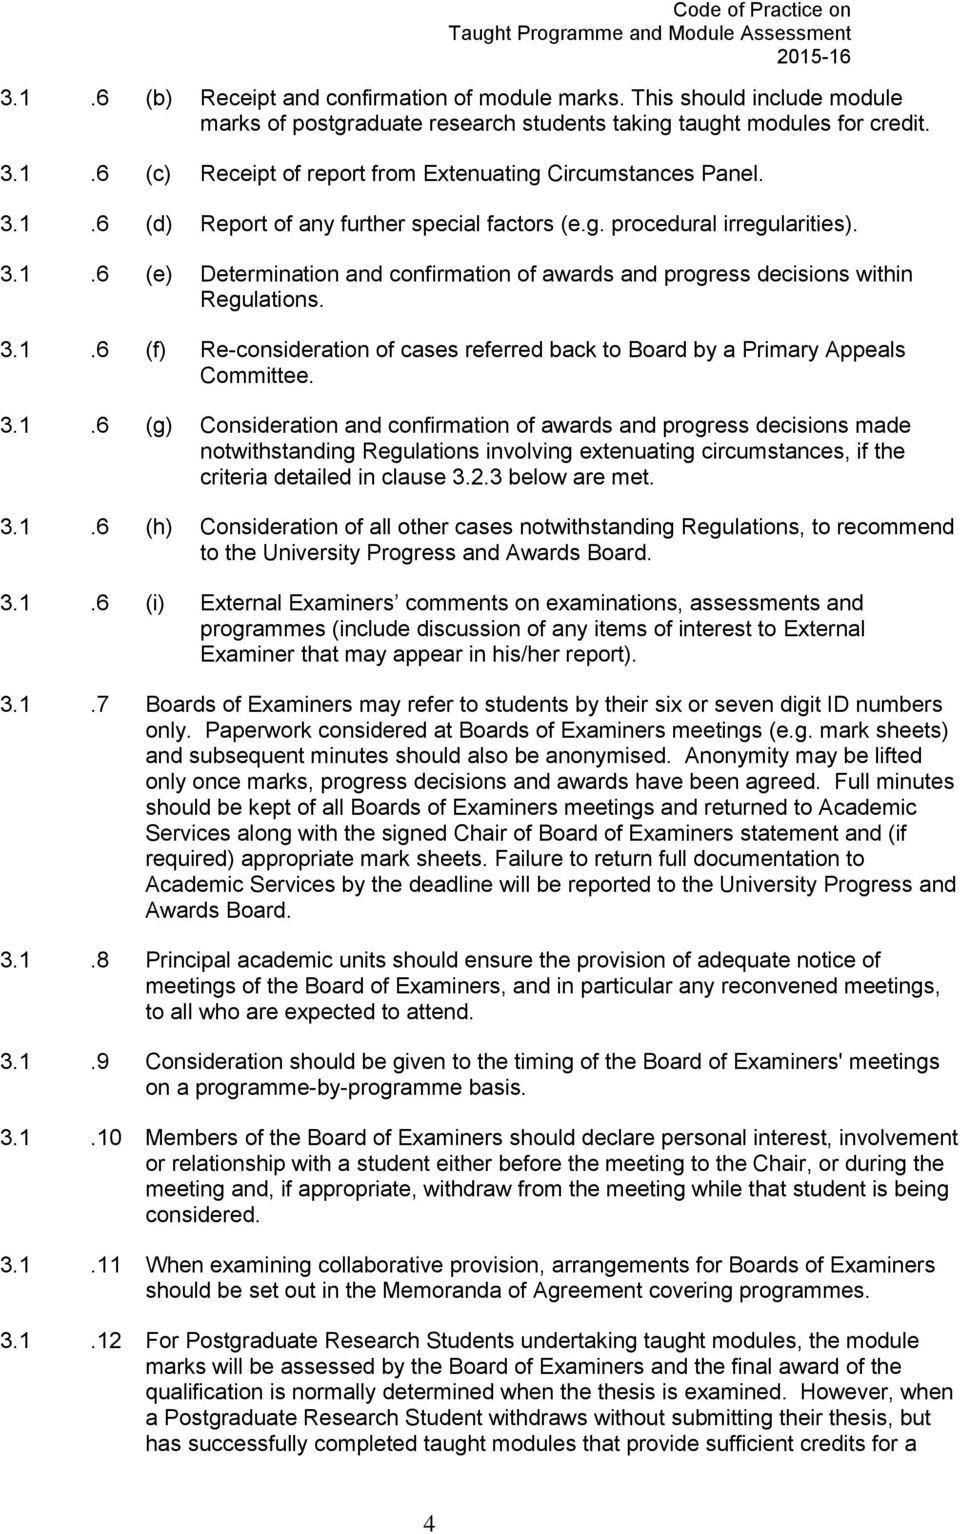 3.1.6 (g) Consideration and confirmation of awards and progress decisions made notwithstanding Regulations involving extenuating circumstances, if the criteria detailed in clause 3.2.3 below are met.